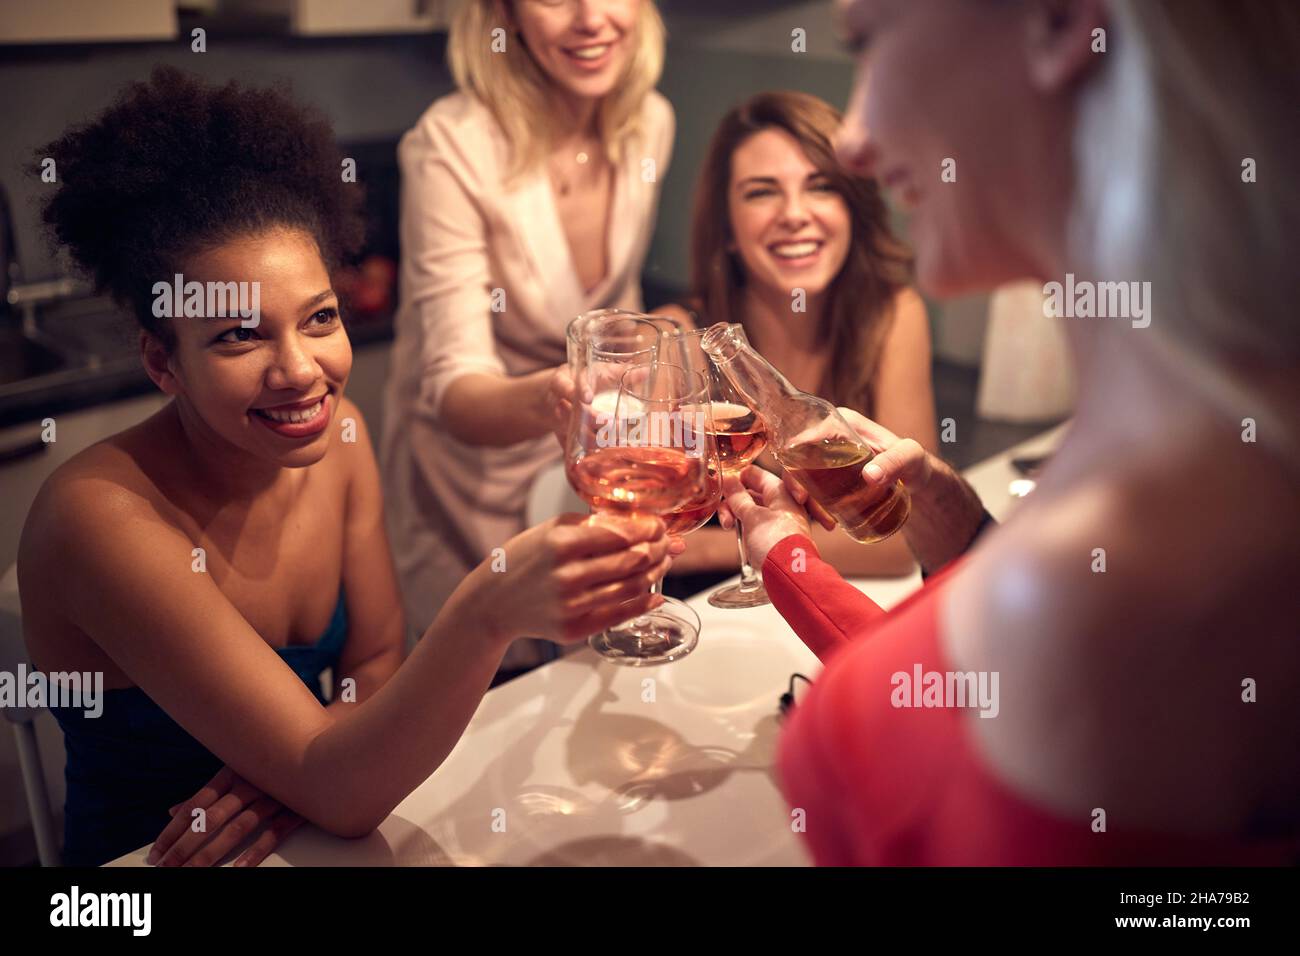 Happy friends together cheering and toasting celebrating Stock Photo